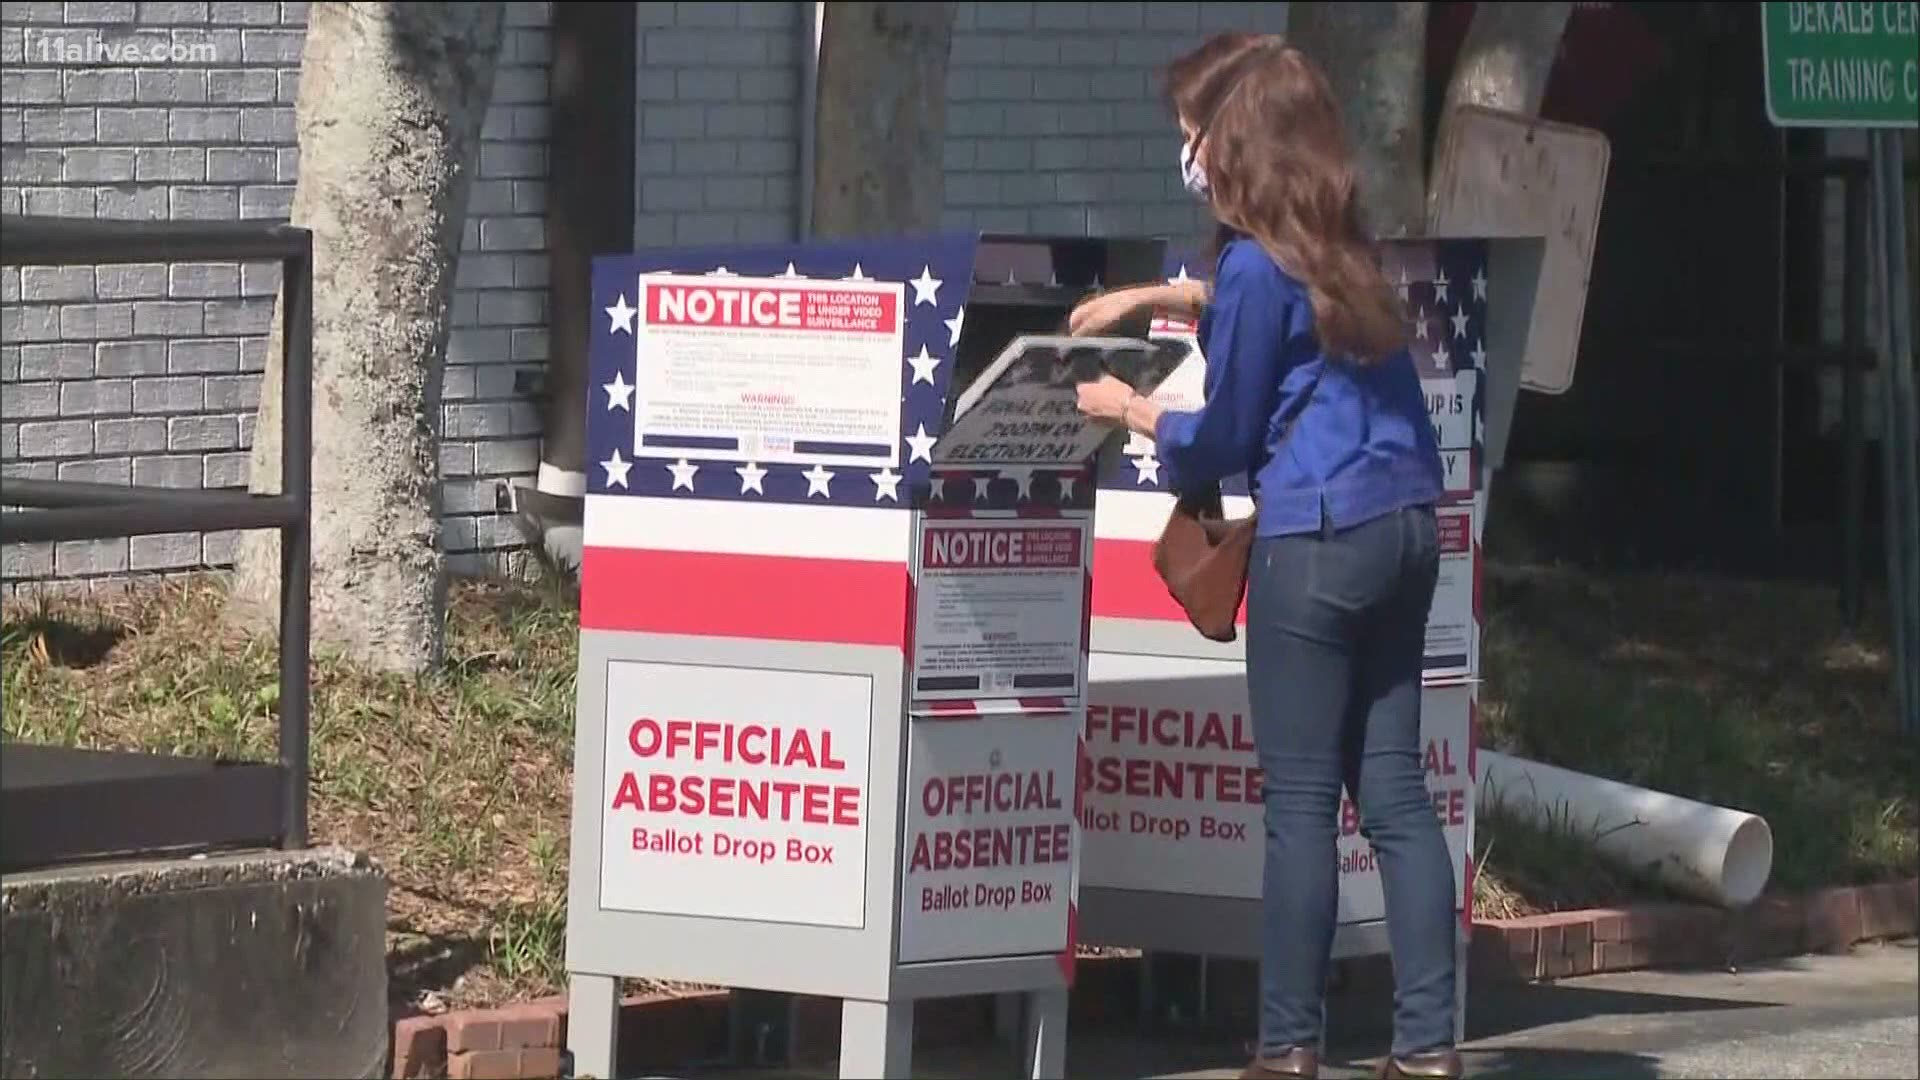 Roughly half-a-million voters who requested absentee ballots haven't returned them. There are still ways to make sure these votes count, though.